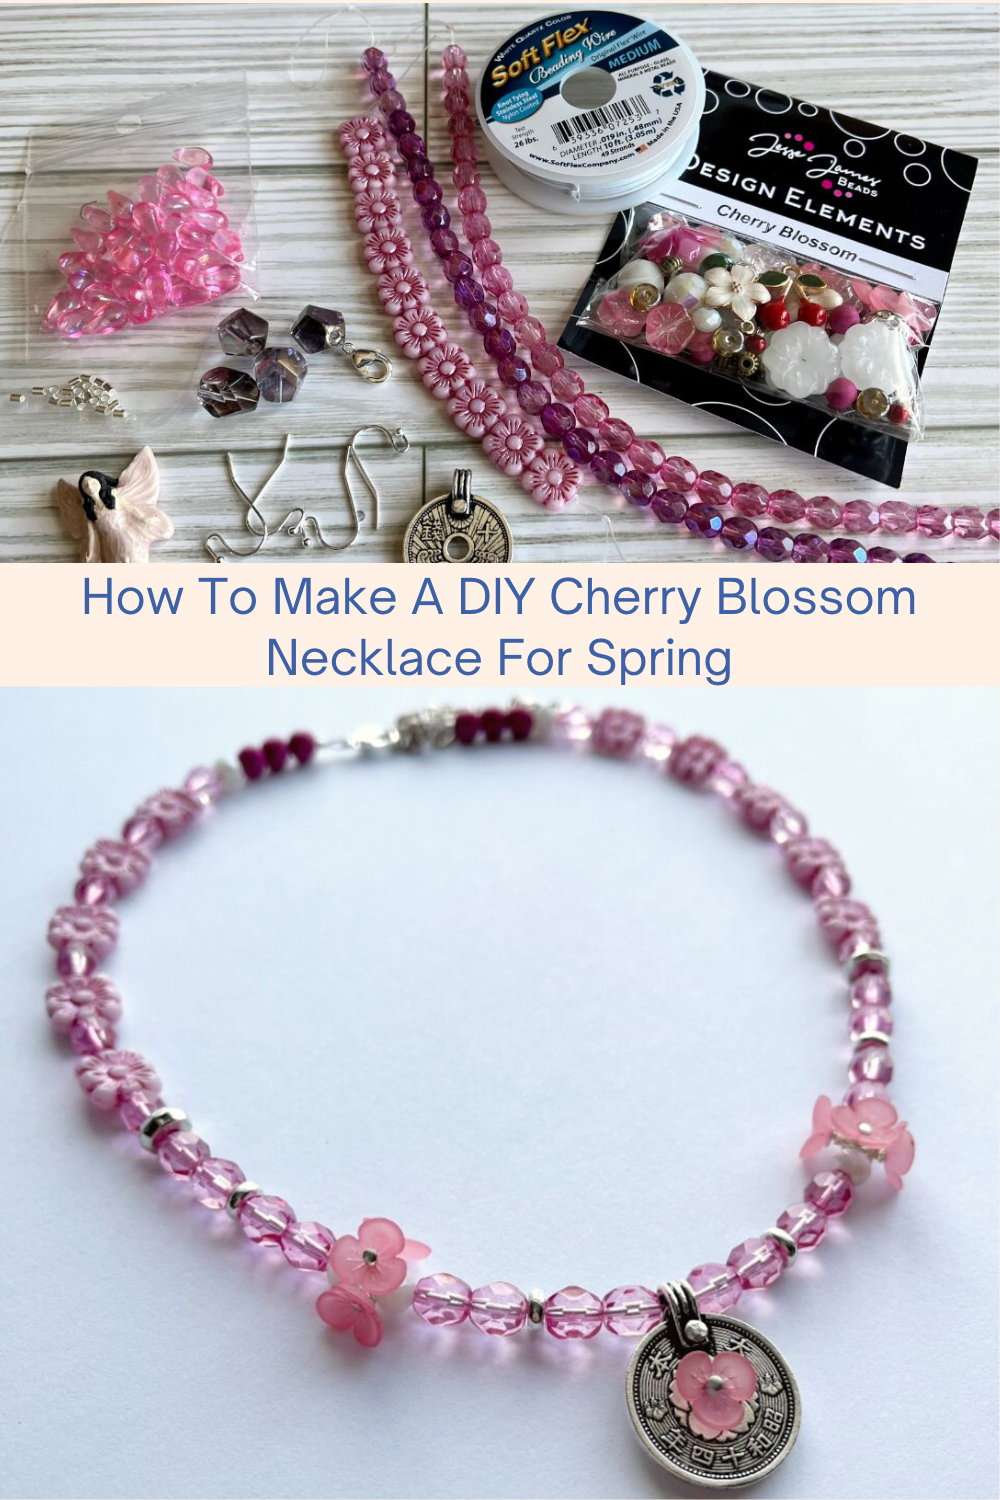 How To Make A DIY Cherry Blossom Necklace For Spring Collage